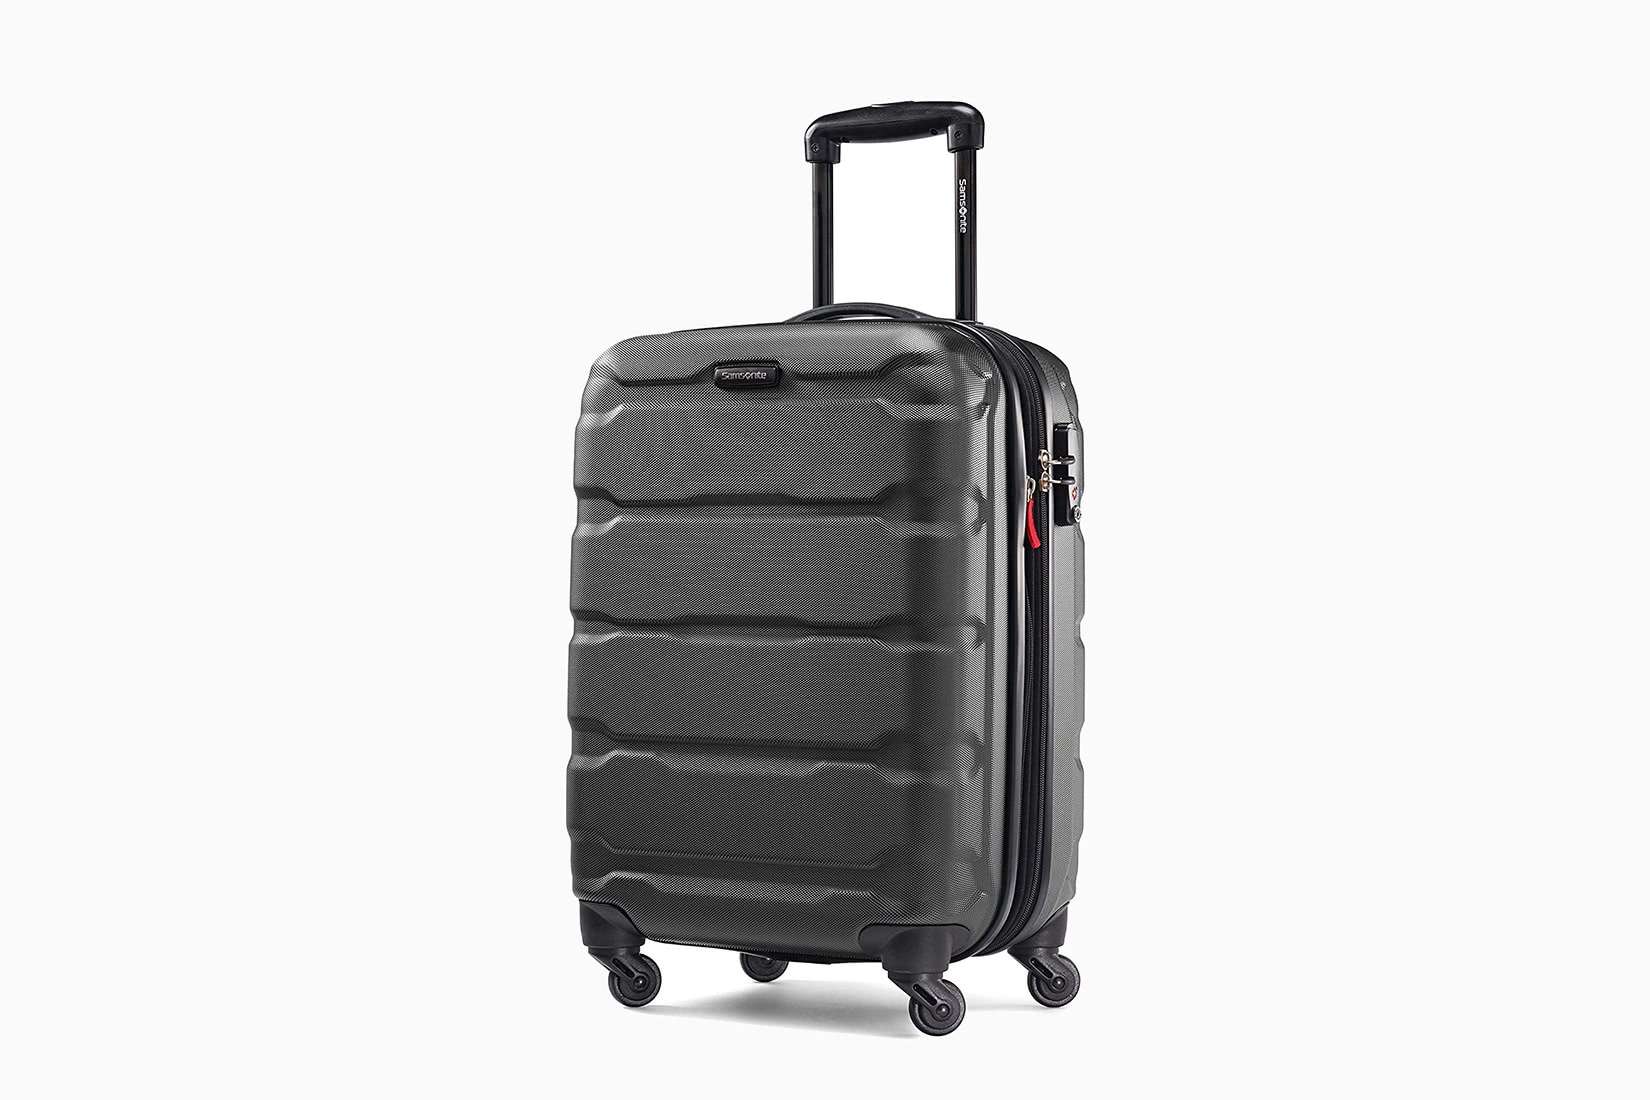 best carry-on suitcase travel samsonite robust - Luxe Digital